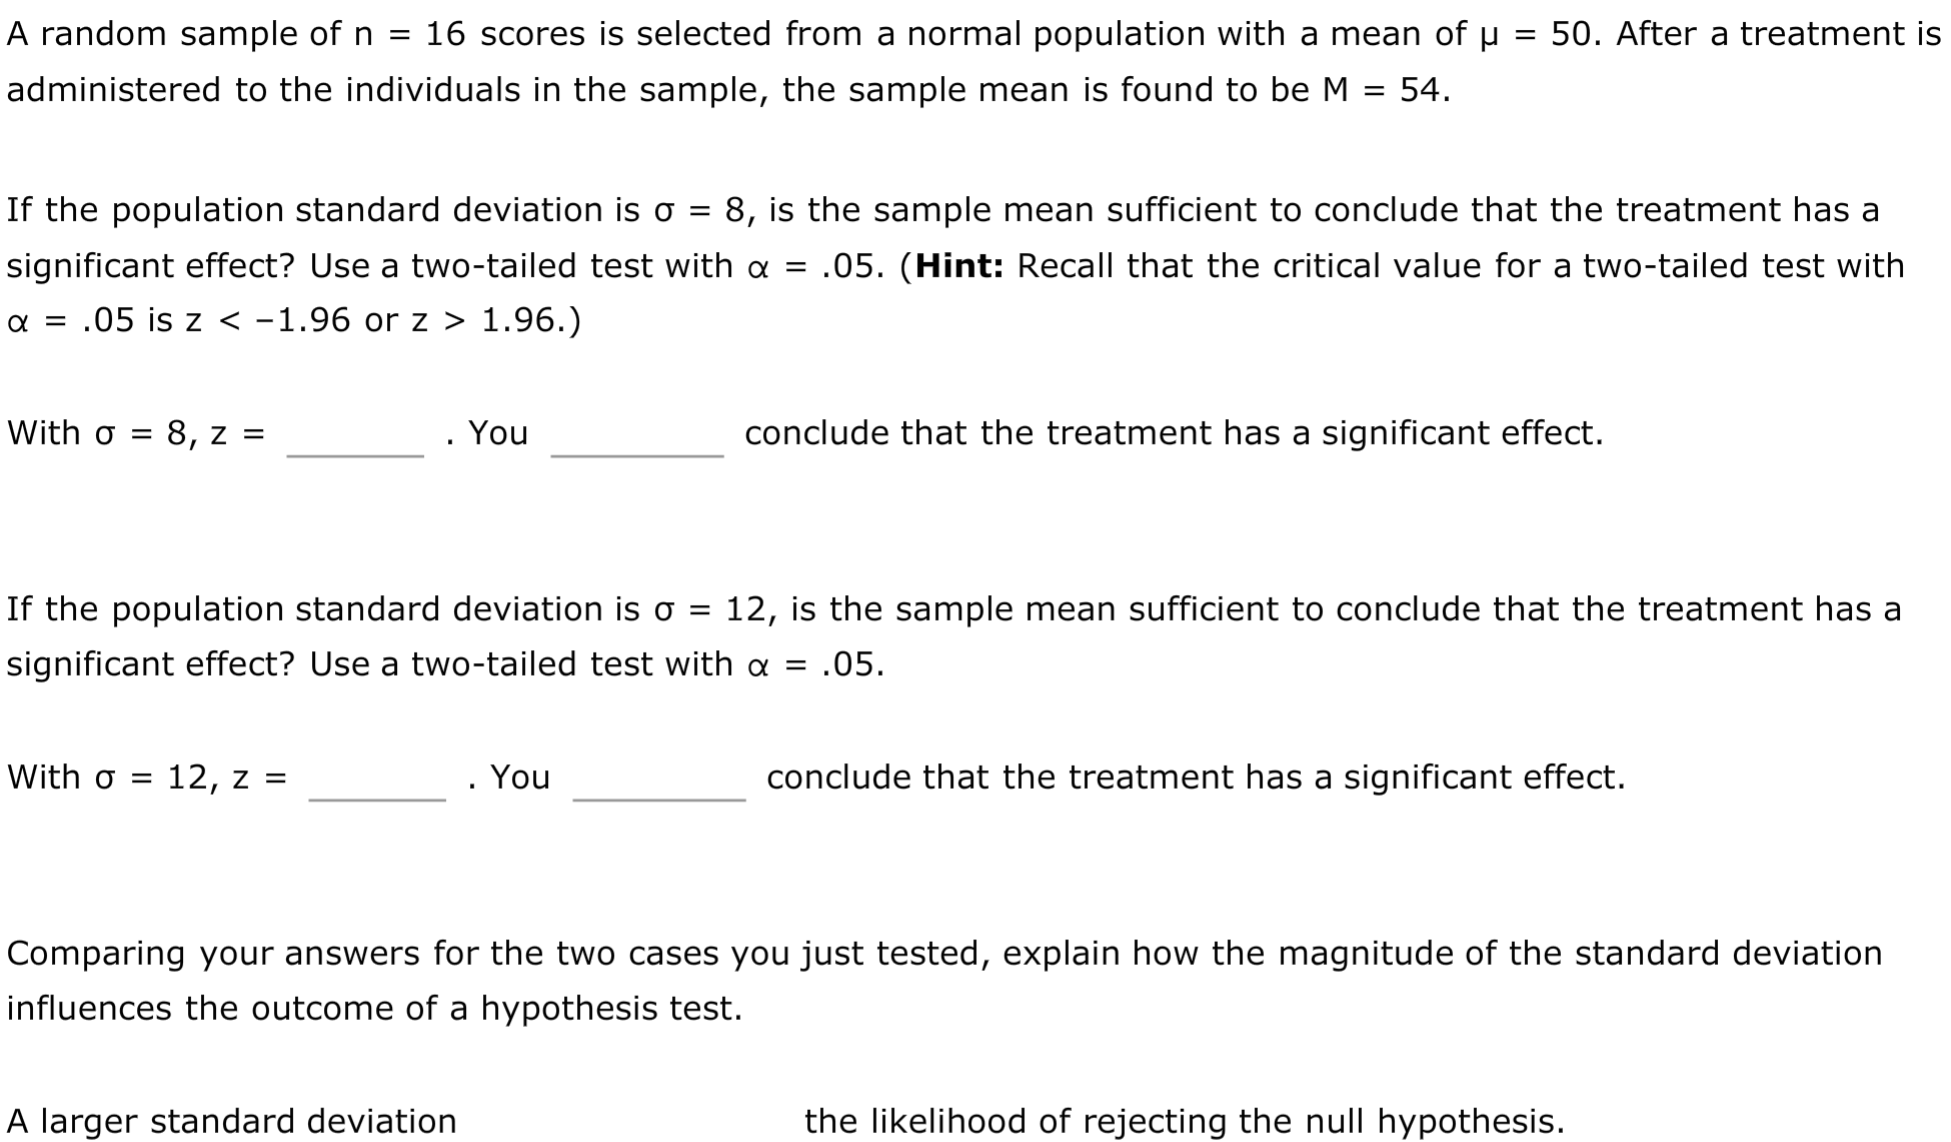 If the population standard deviation is o =
8, is the sample mean sufficient to conclude that the treatment has a
significant effect? Use a two-tailed test with a = .05. (Hint: Recall that the critical value for a two-tailed test with
a = .05 is z < -1.96 or z > 1.96.)
With o =
8, z =
. You
conclude that the treatment has a significant effect.
If the population standard deviation is o
12, is the sample mean sufficient to conclude that the treatment has a
significant effect? Use a two-tailed test with a = .05.
With o = 12, z =
You
conclude that the treatment has a significant effect.
